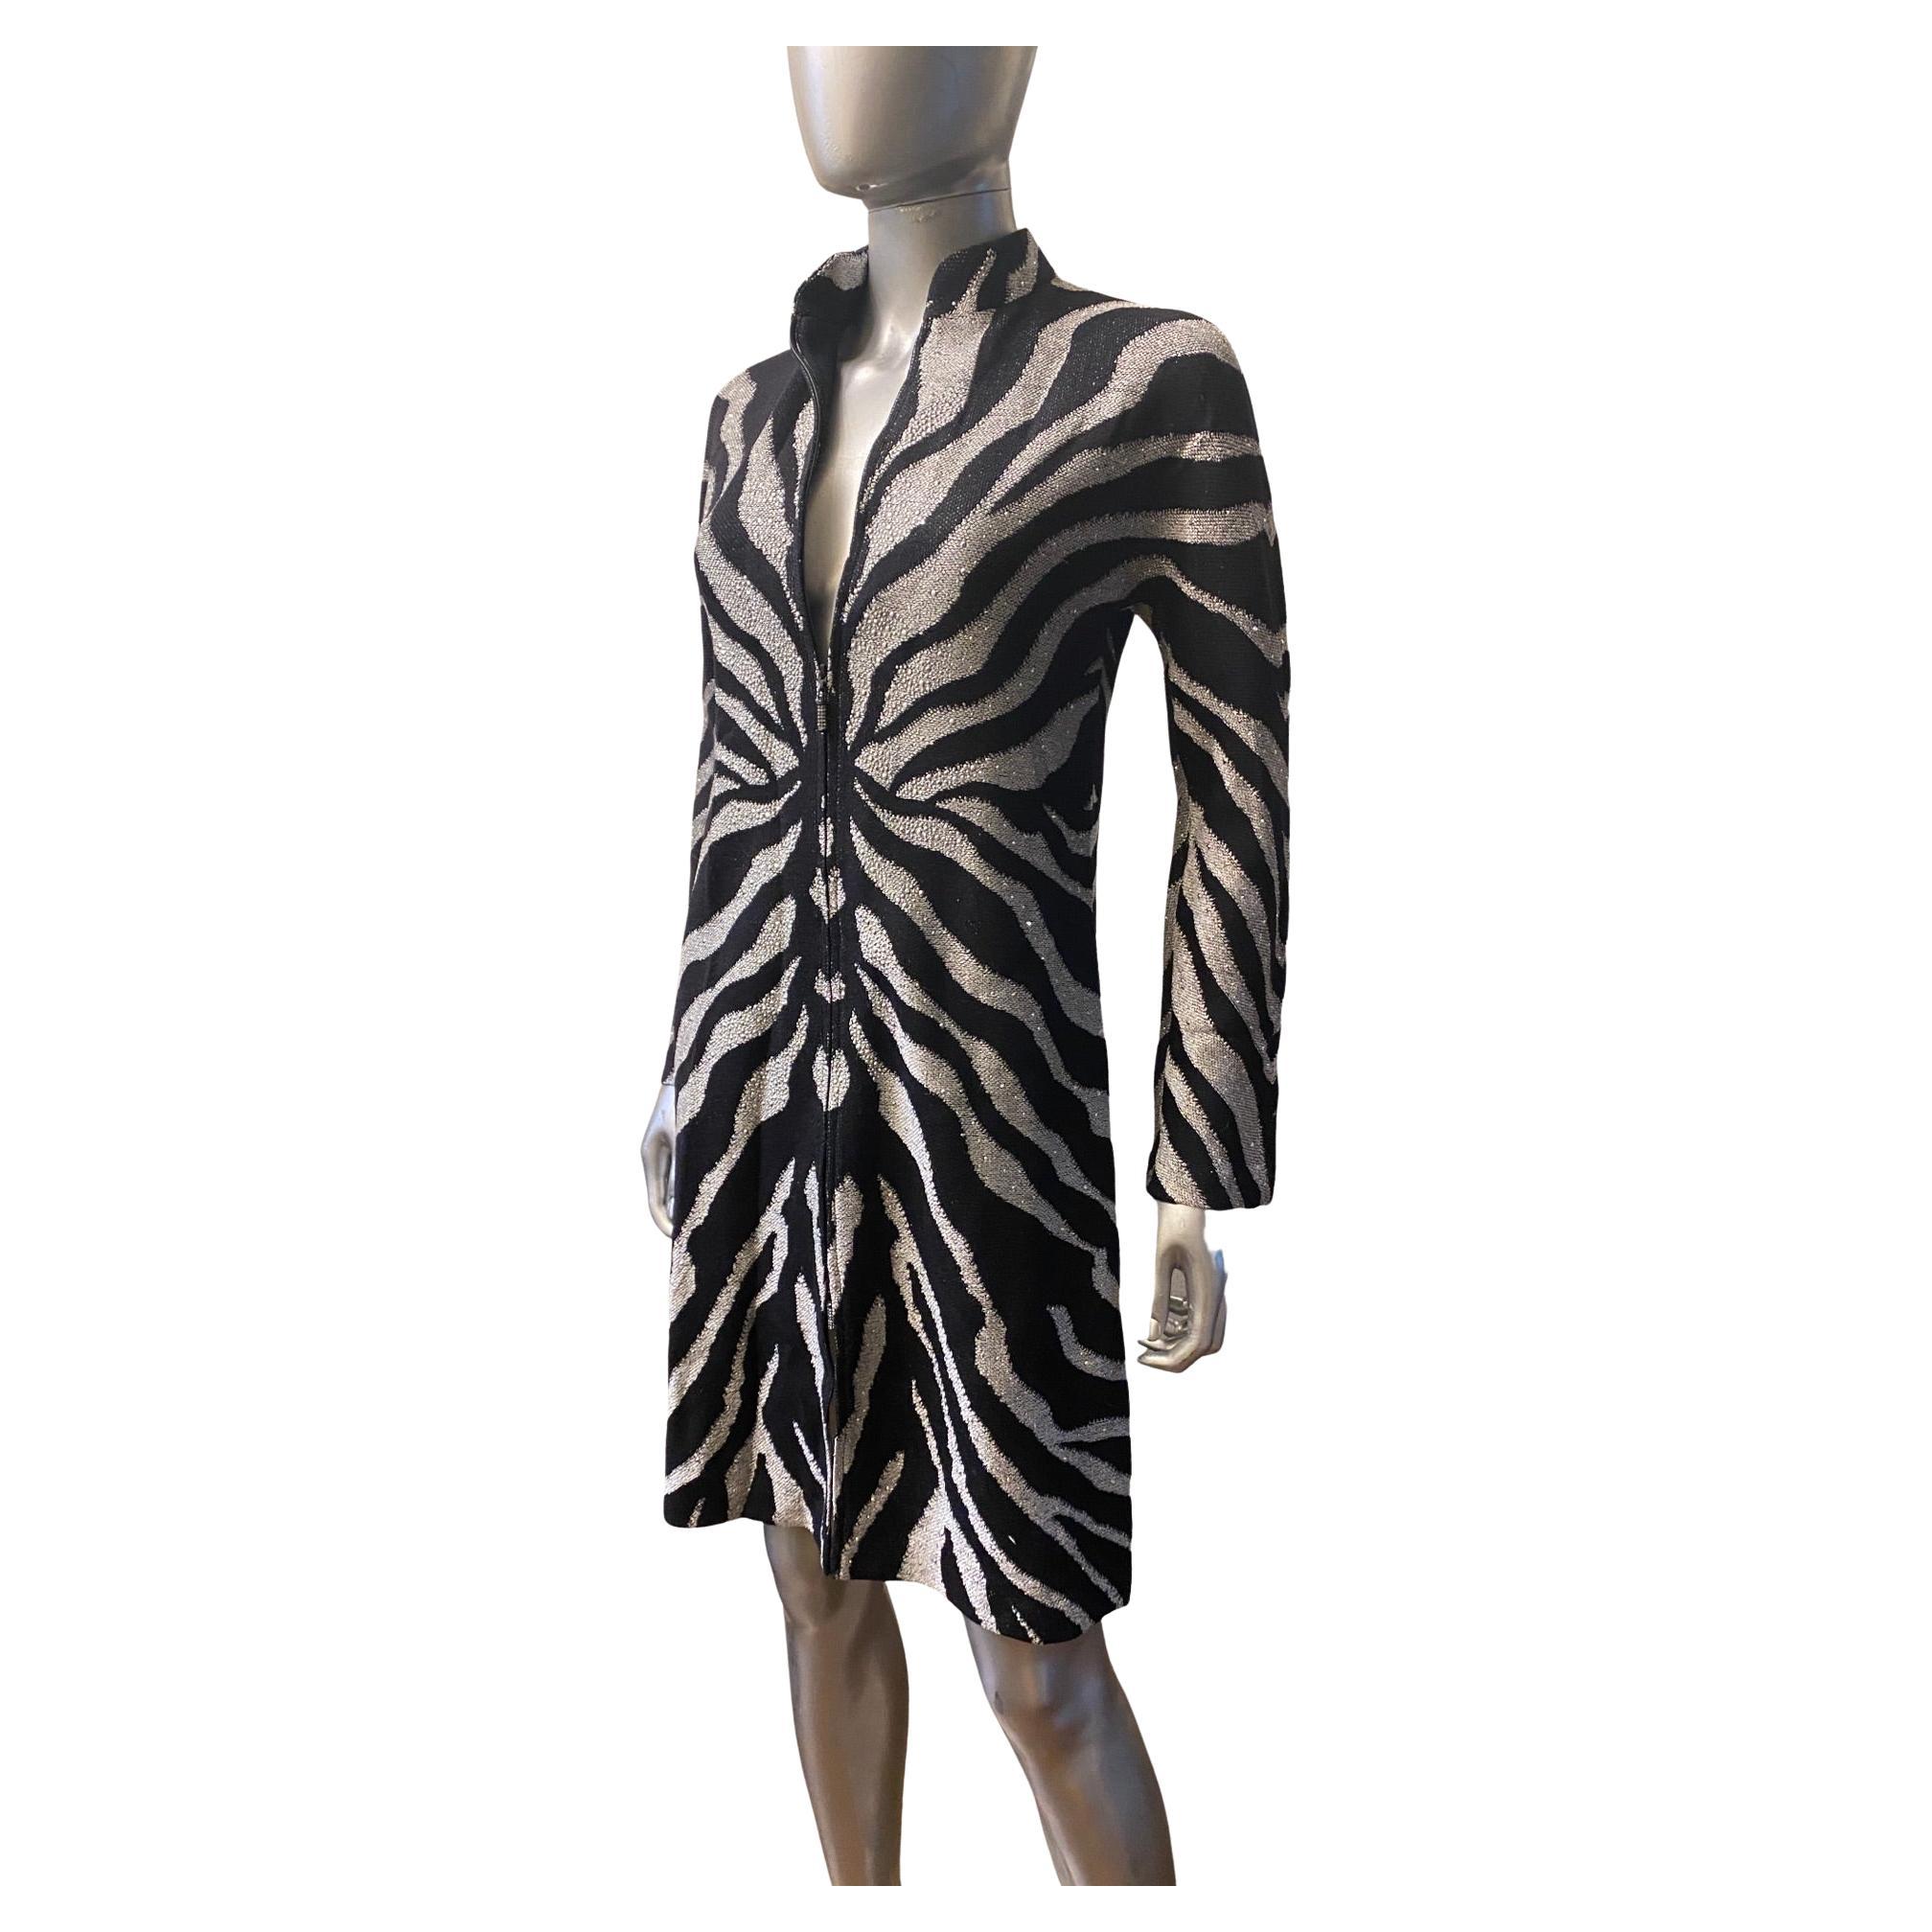 St John Evening Zebra Knit Zip Front Dress with Silver Beading Size 2 NWT For Sale